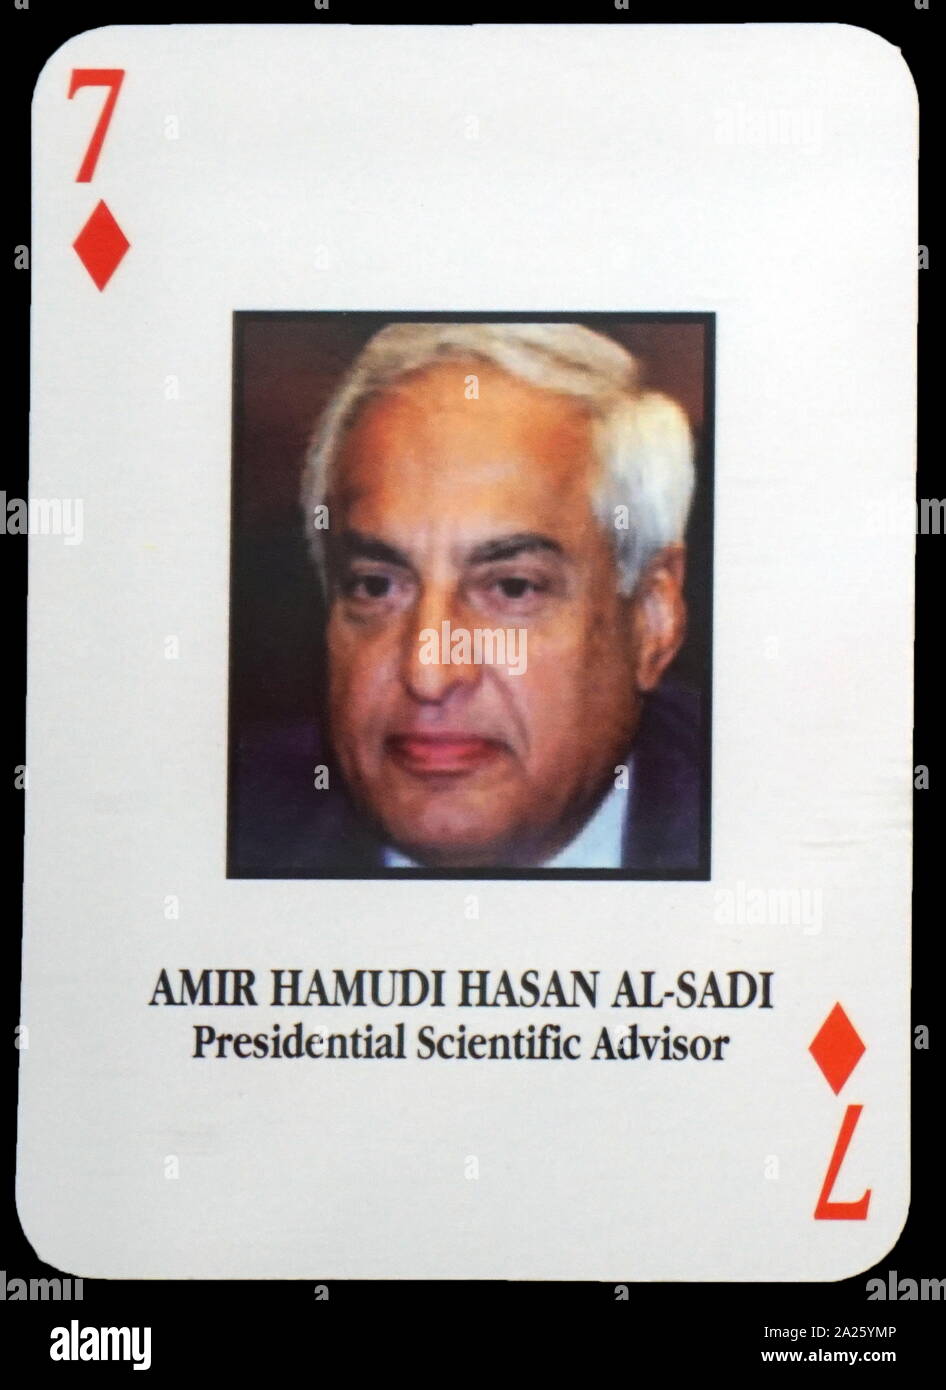 Most-wanted Iraqi playing cards - Amir Hamudi Hasan Al-Sadi (Presidential Scientific Advisor). The U.S. military developed a set of playing cards to help troop identify the most-wanted members of President Saddam Hussein's government during the 2003 invasion of Iraq. Stock Photo